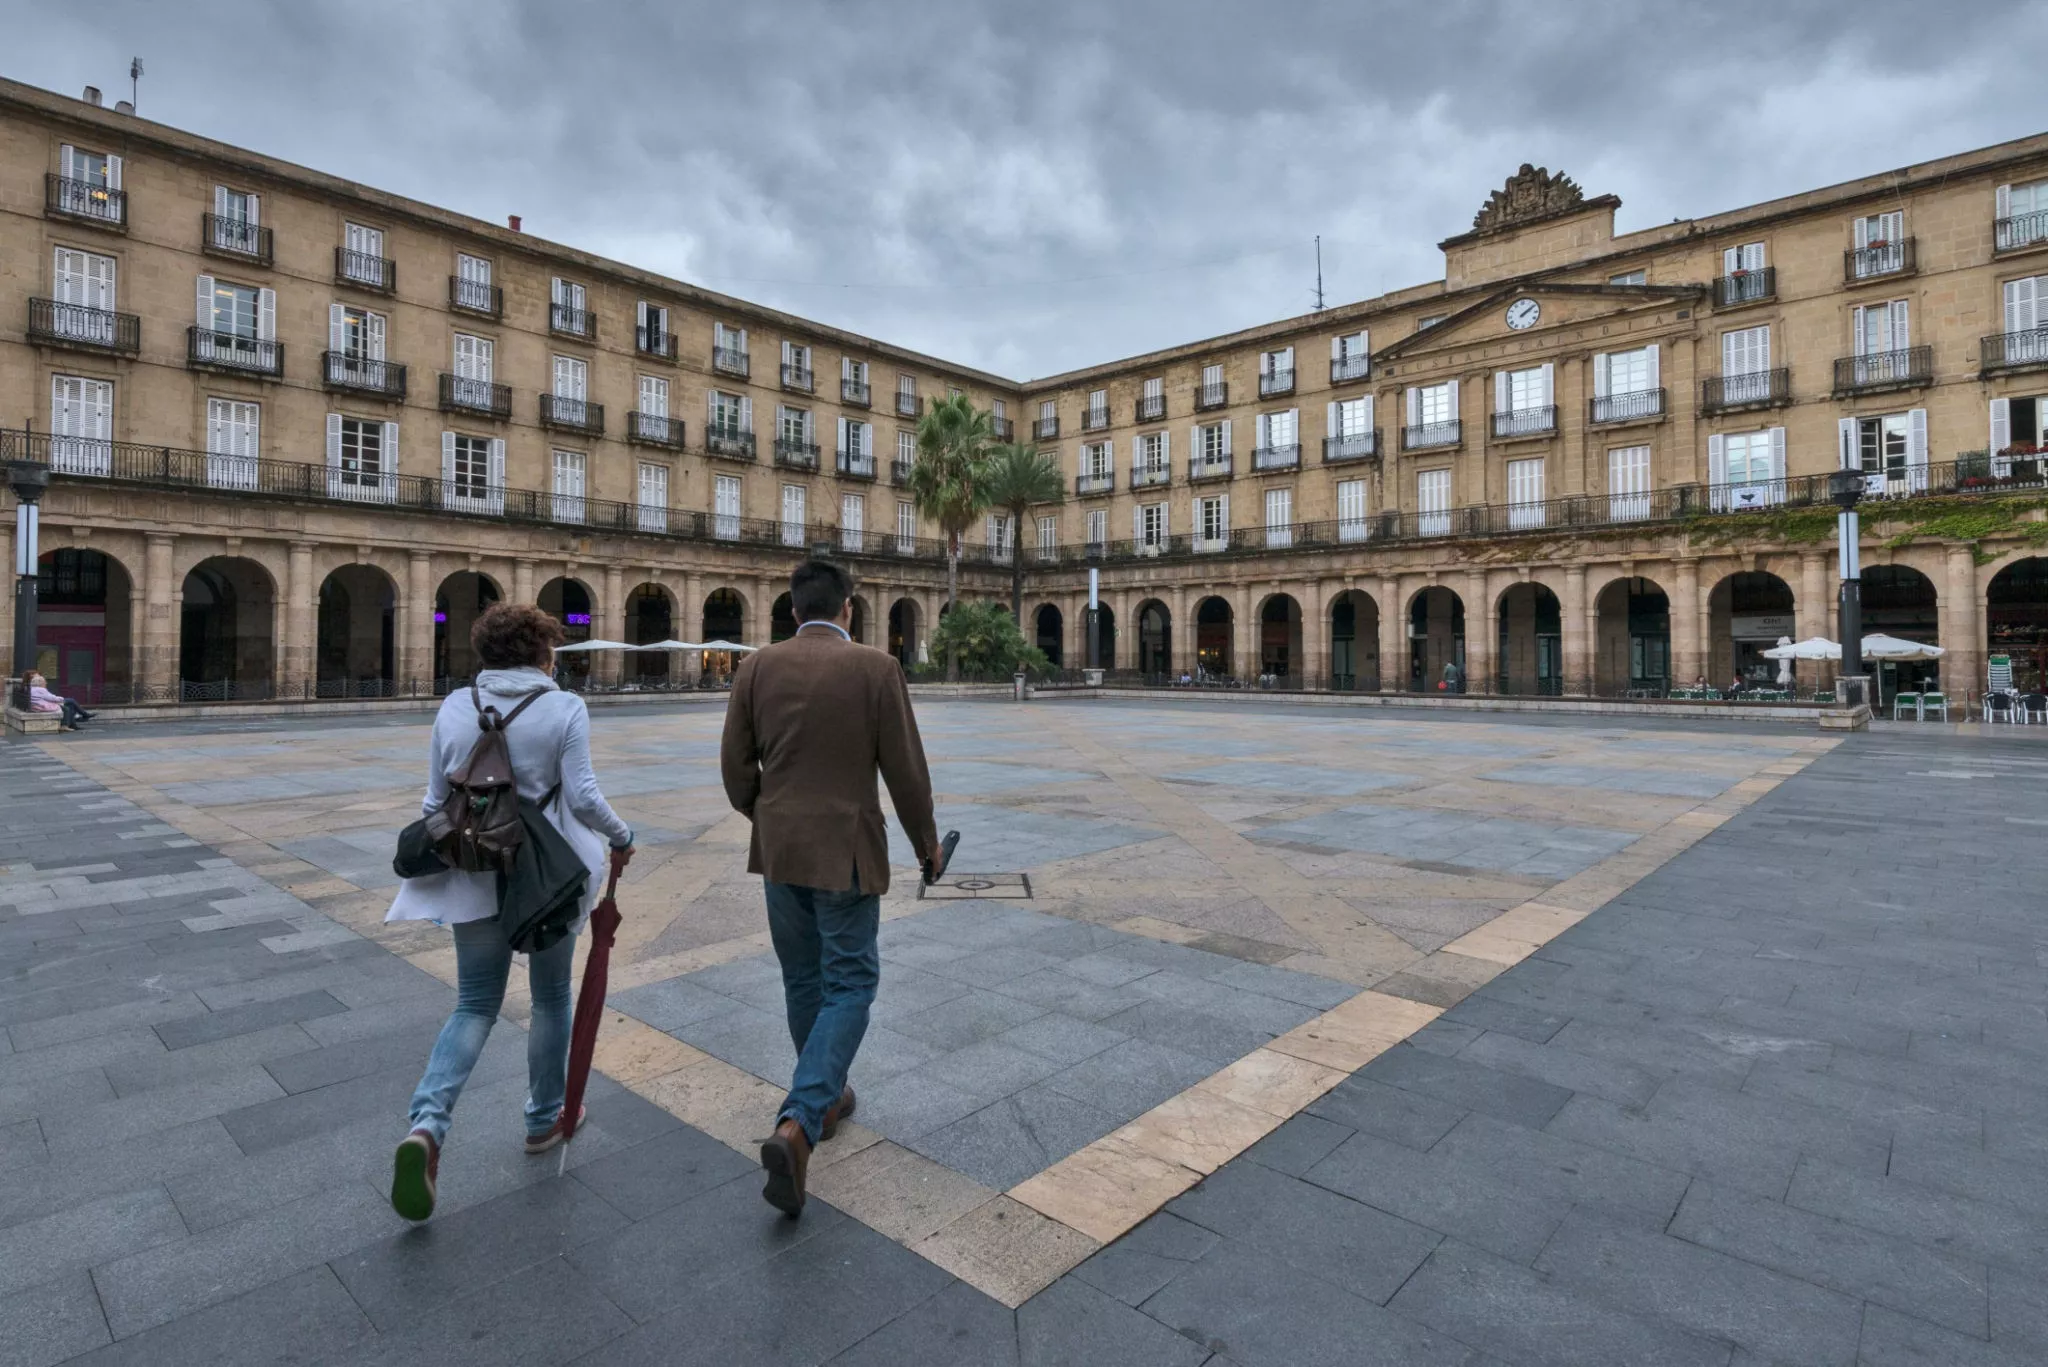 New Square in Spain, Europe | Architecture - Rated 3.8